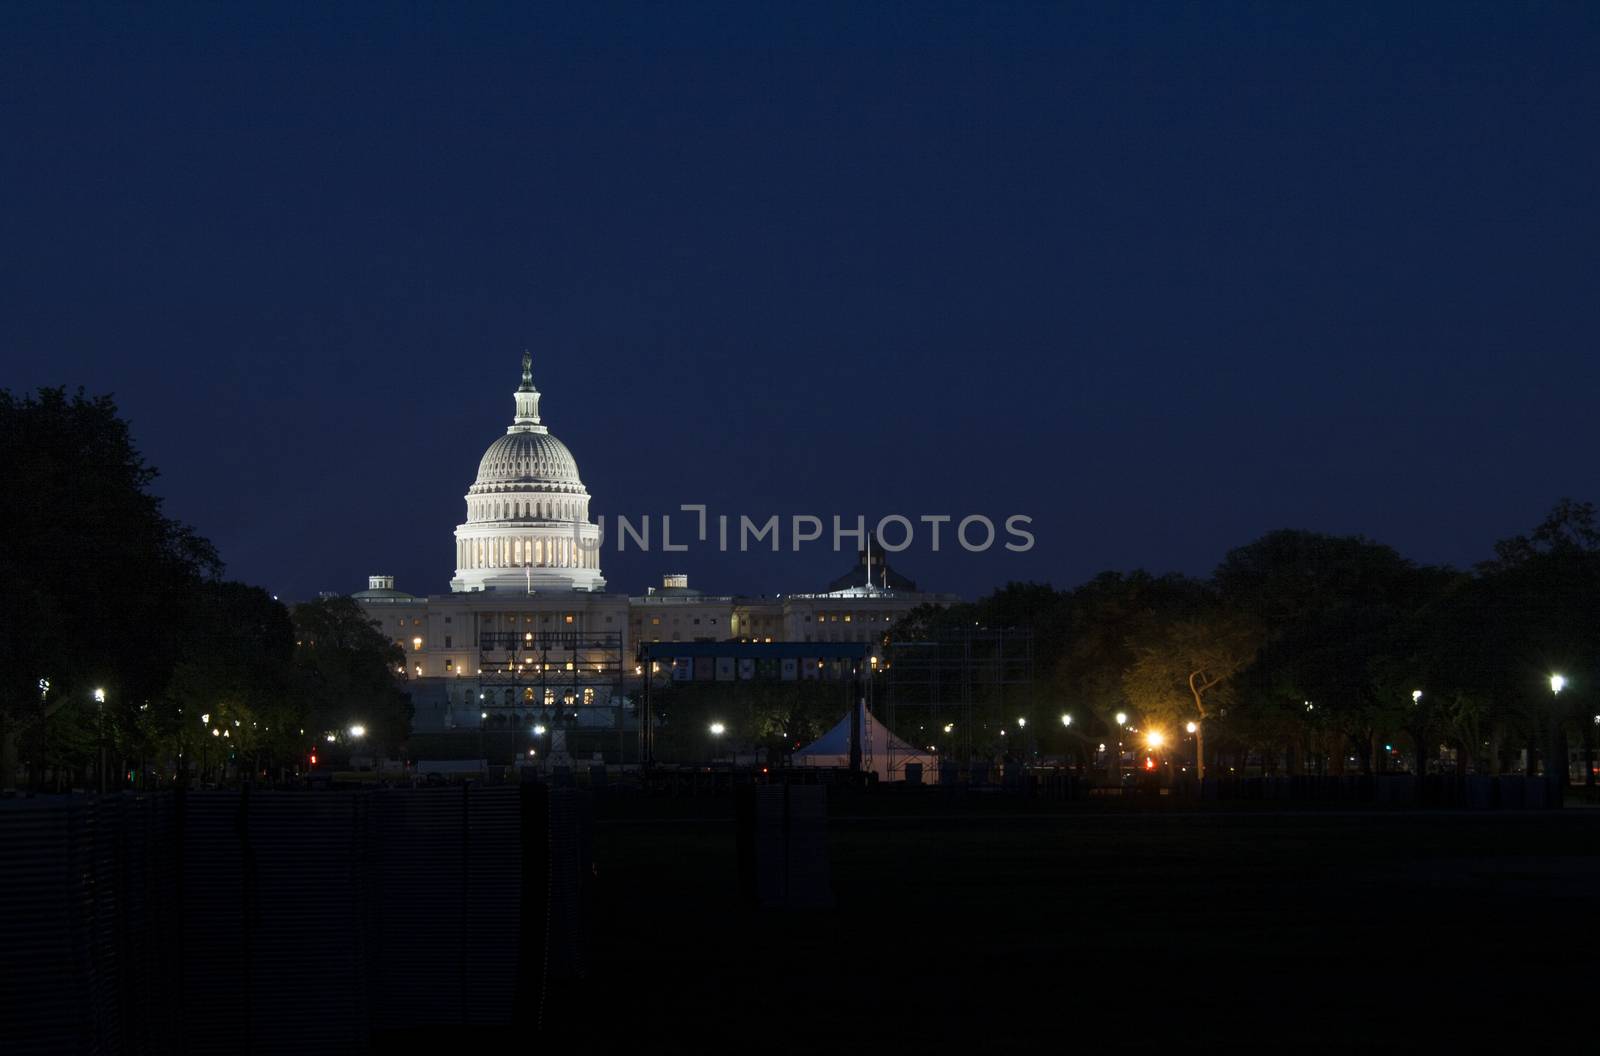 The US Capitol in Washington D.C. in the night